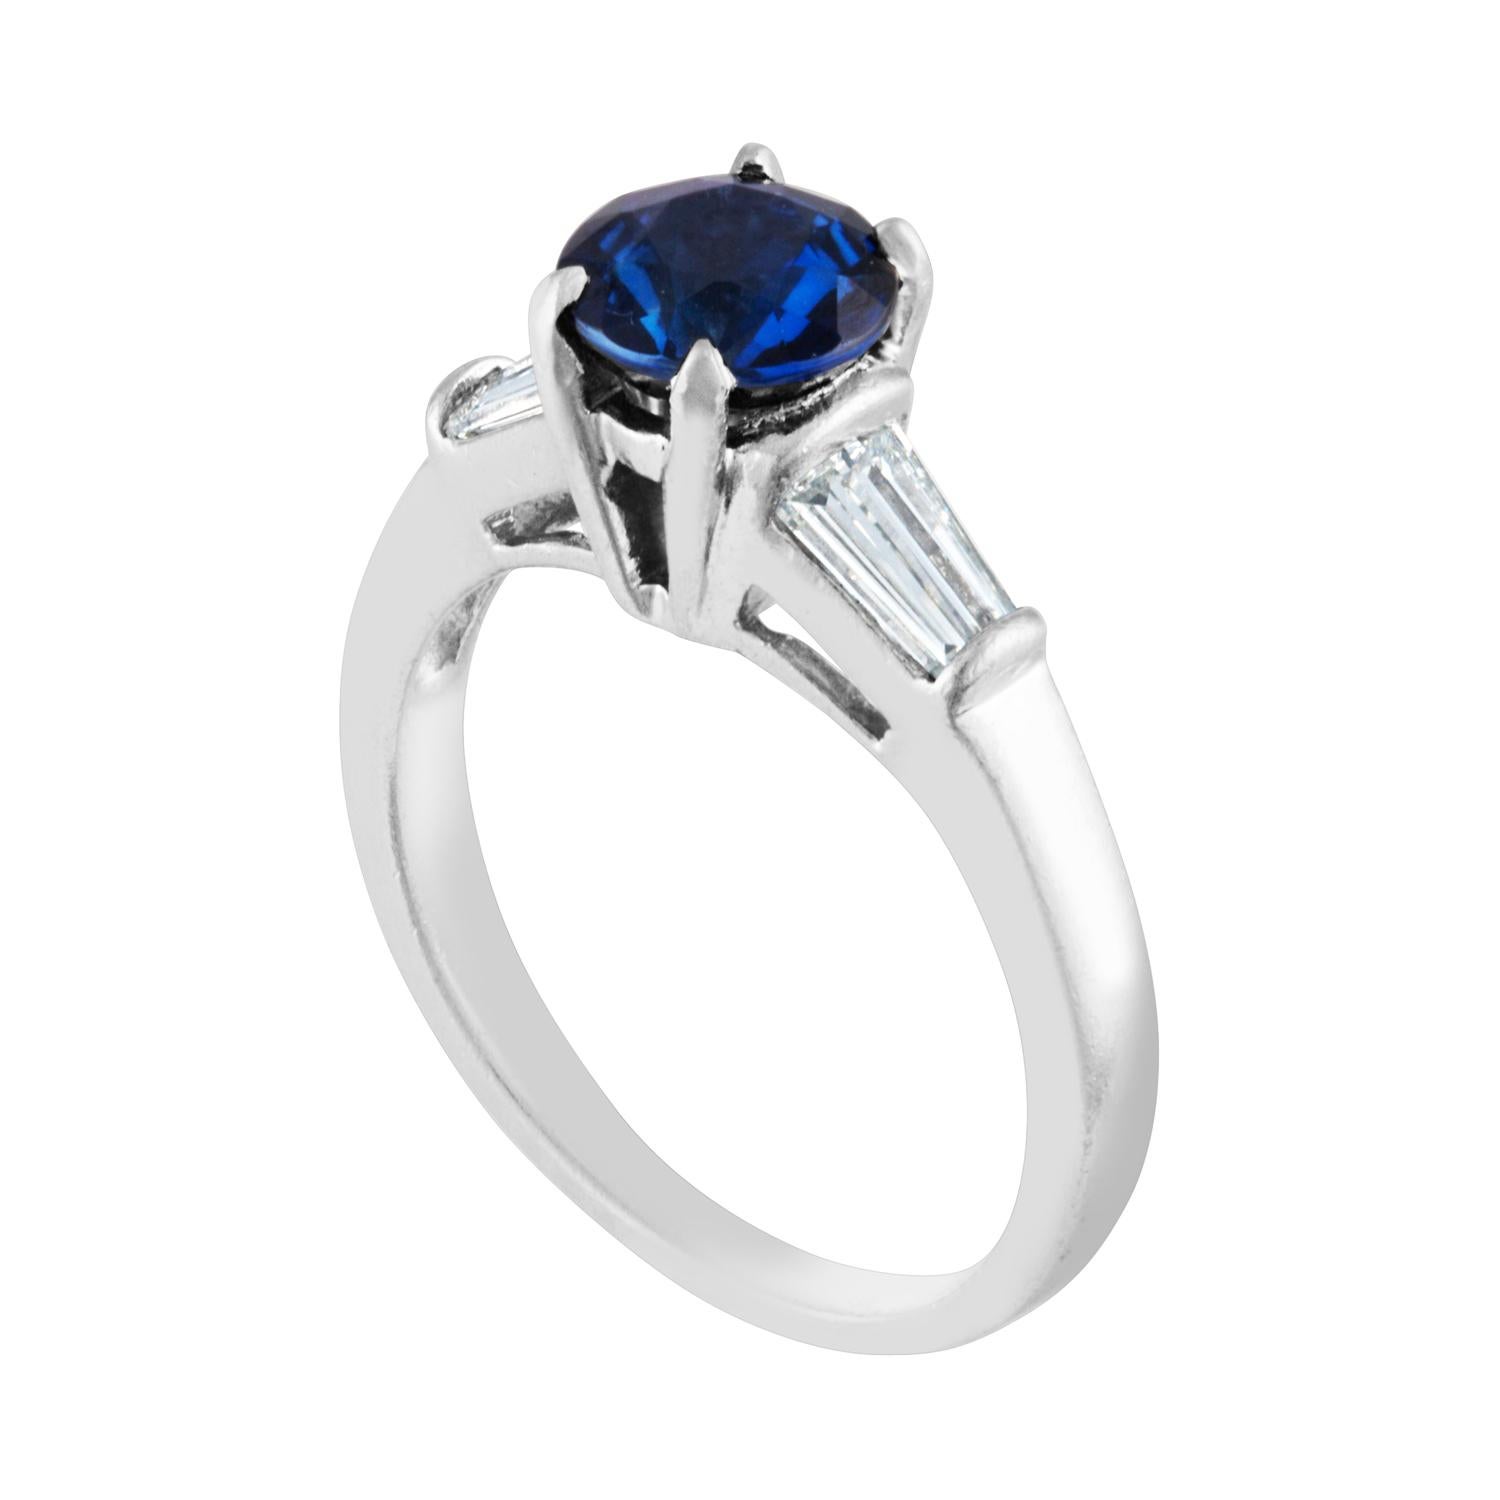 Beautiful Blue Sapphire Ring.
The ring is Platinum.
The Blue Sapphire is Round 1.41 Carat.
The stone is AGL Certified,
The stone is Heated.
There are 0.40 Carat Diamonds F VS
The ring is a size 6.00, sizable.
The ring weighs 6.20 grams